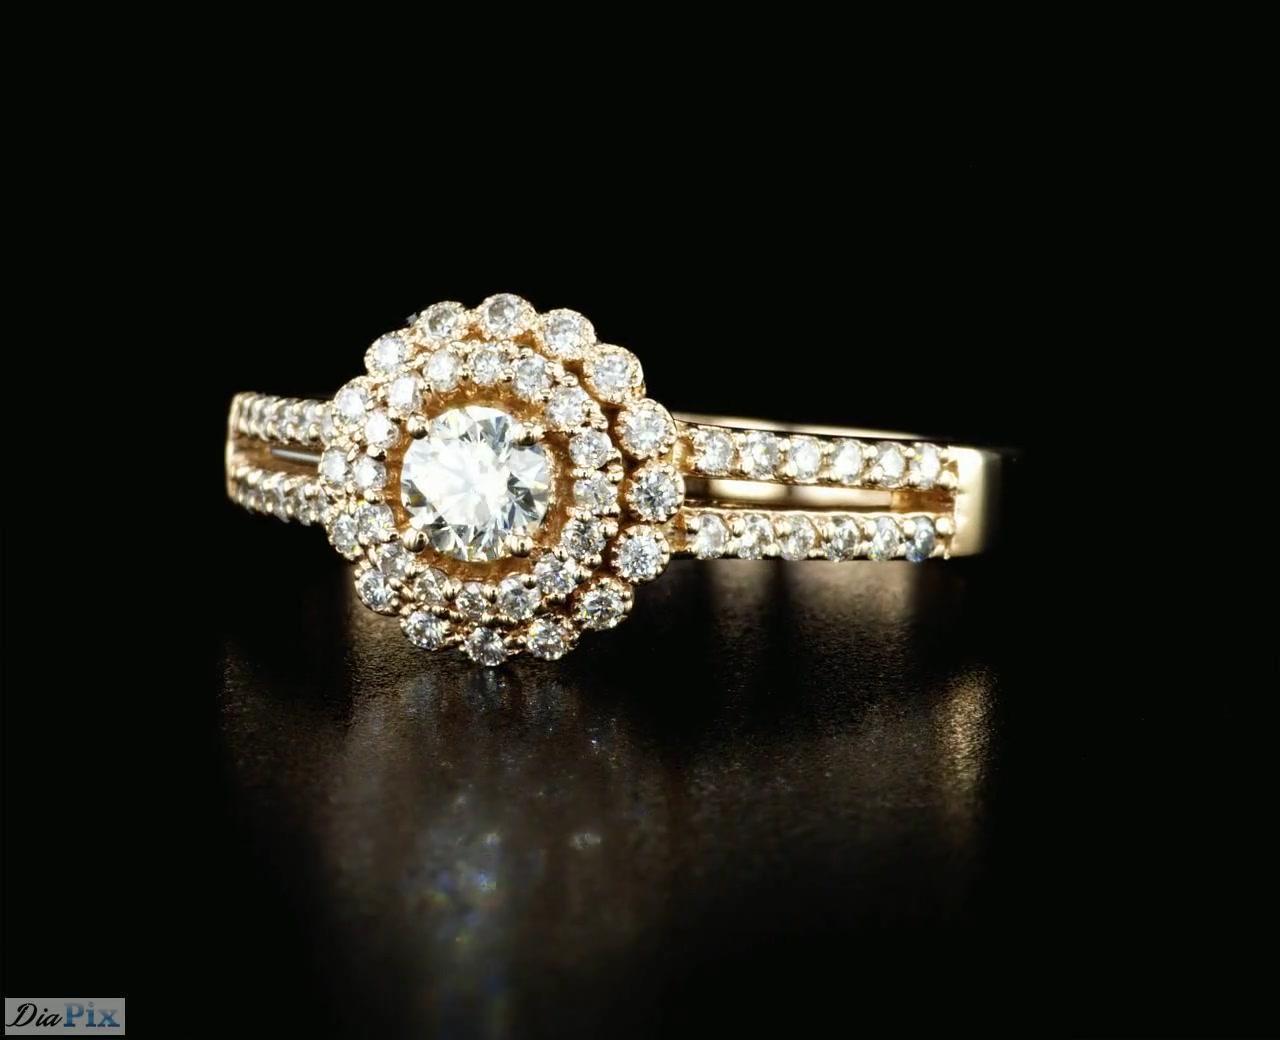 Handcrafted Diamond and Rose gold ring with 0.60 Total Diamond Weight.
This timeless ring is set with high quality 0.25 Carat round brilliant diamond E-G/ VS and surrounded by 56 side diamonds 0.35 Carat total weight mounted on 14K rose  gold.